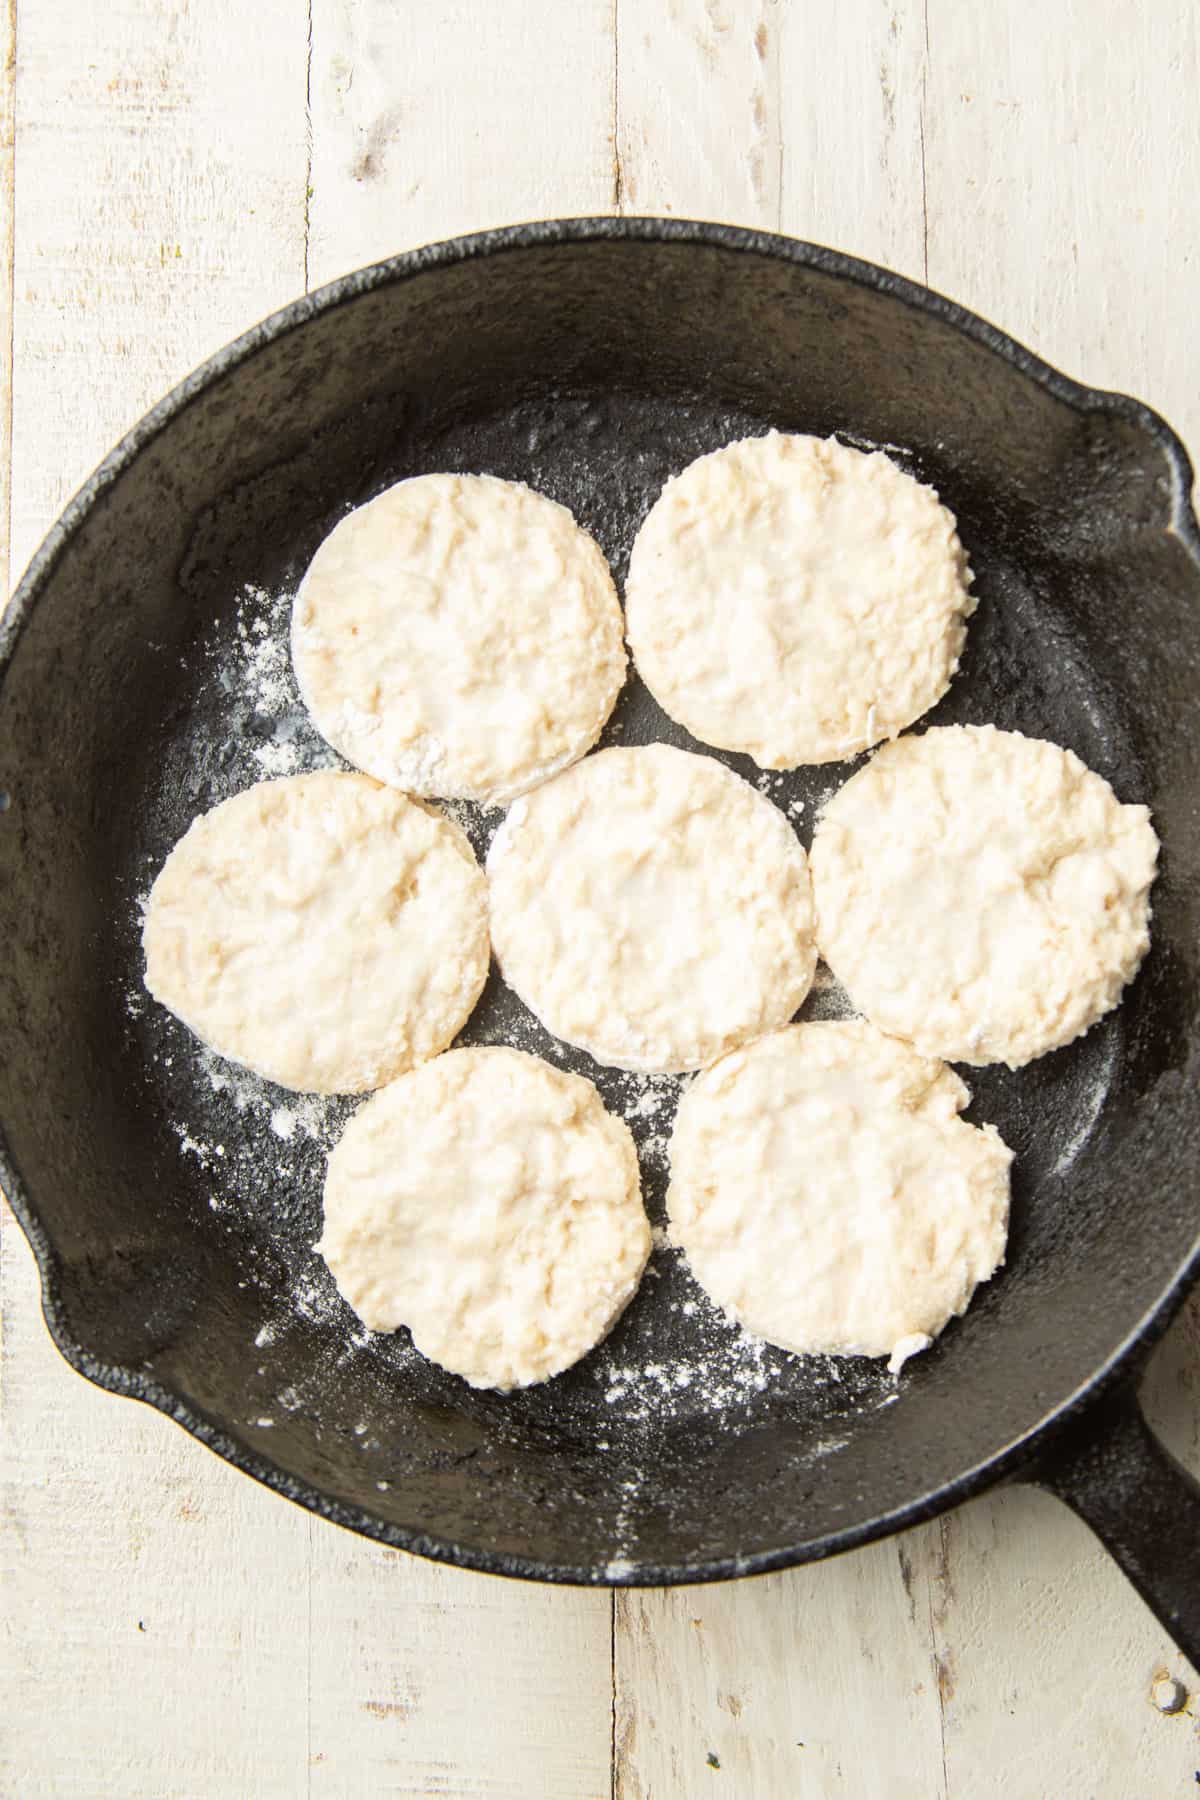 Biscuit dough rounds in a cast iron skillet.